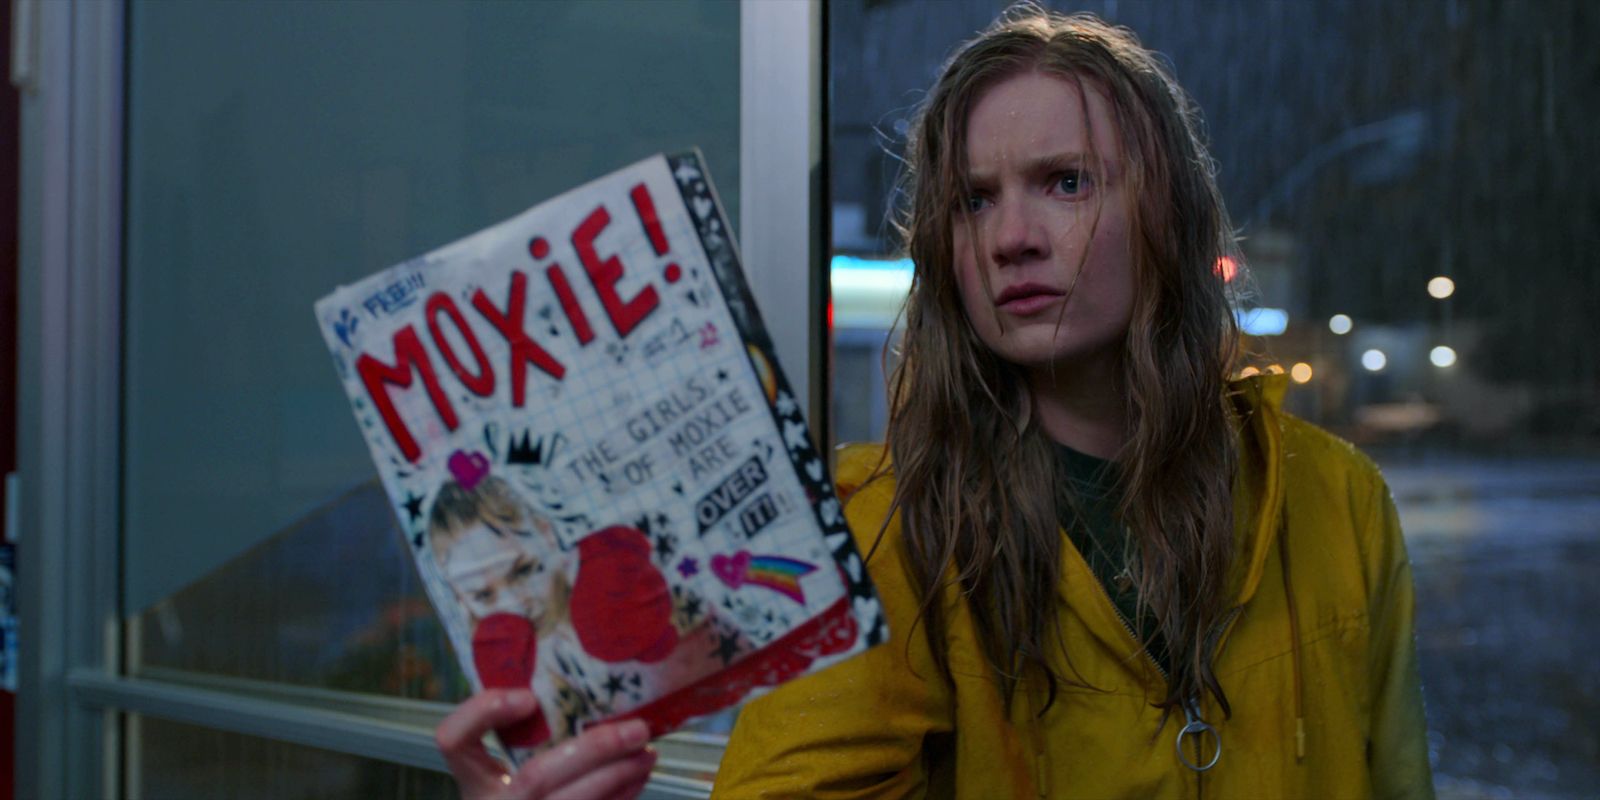 Vivian holds up an issue of her zine in Moxie.